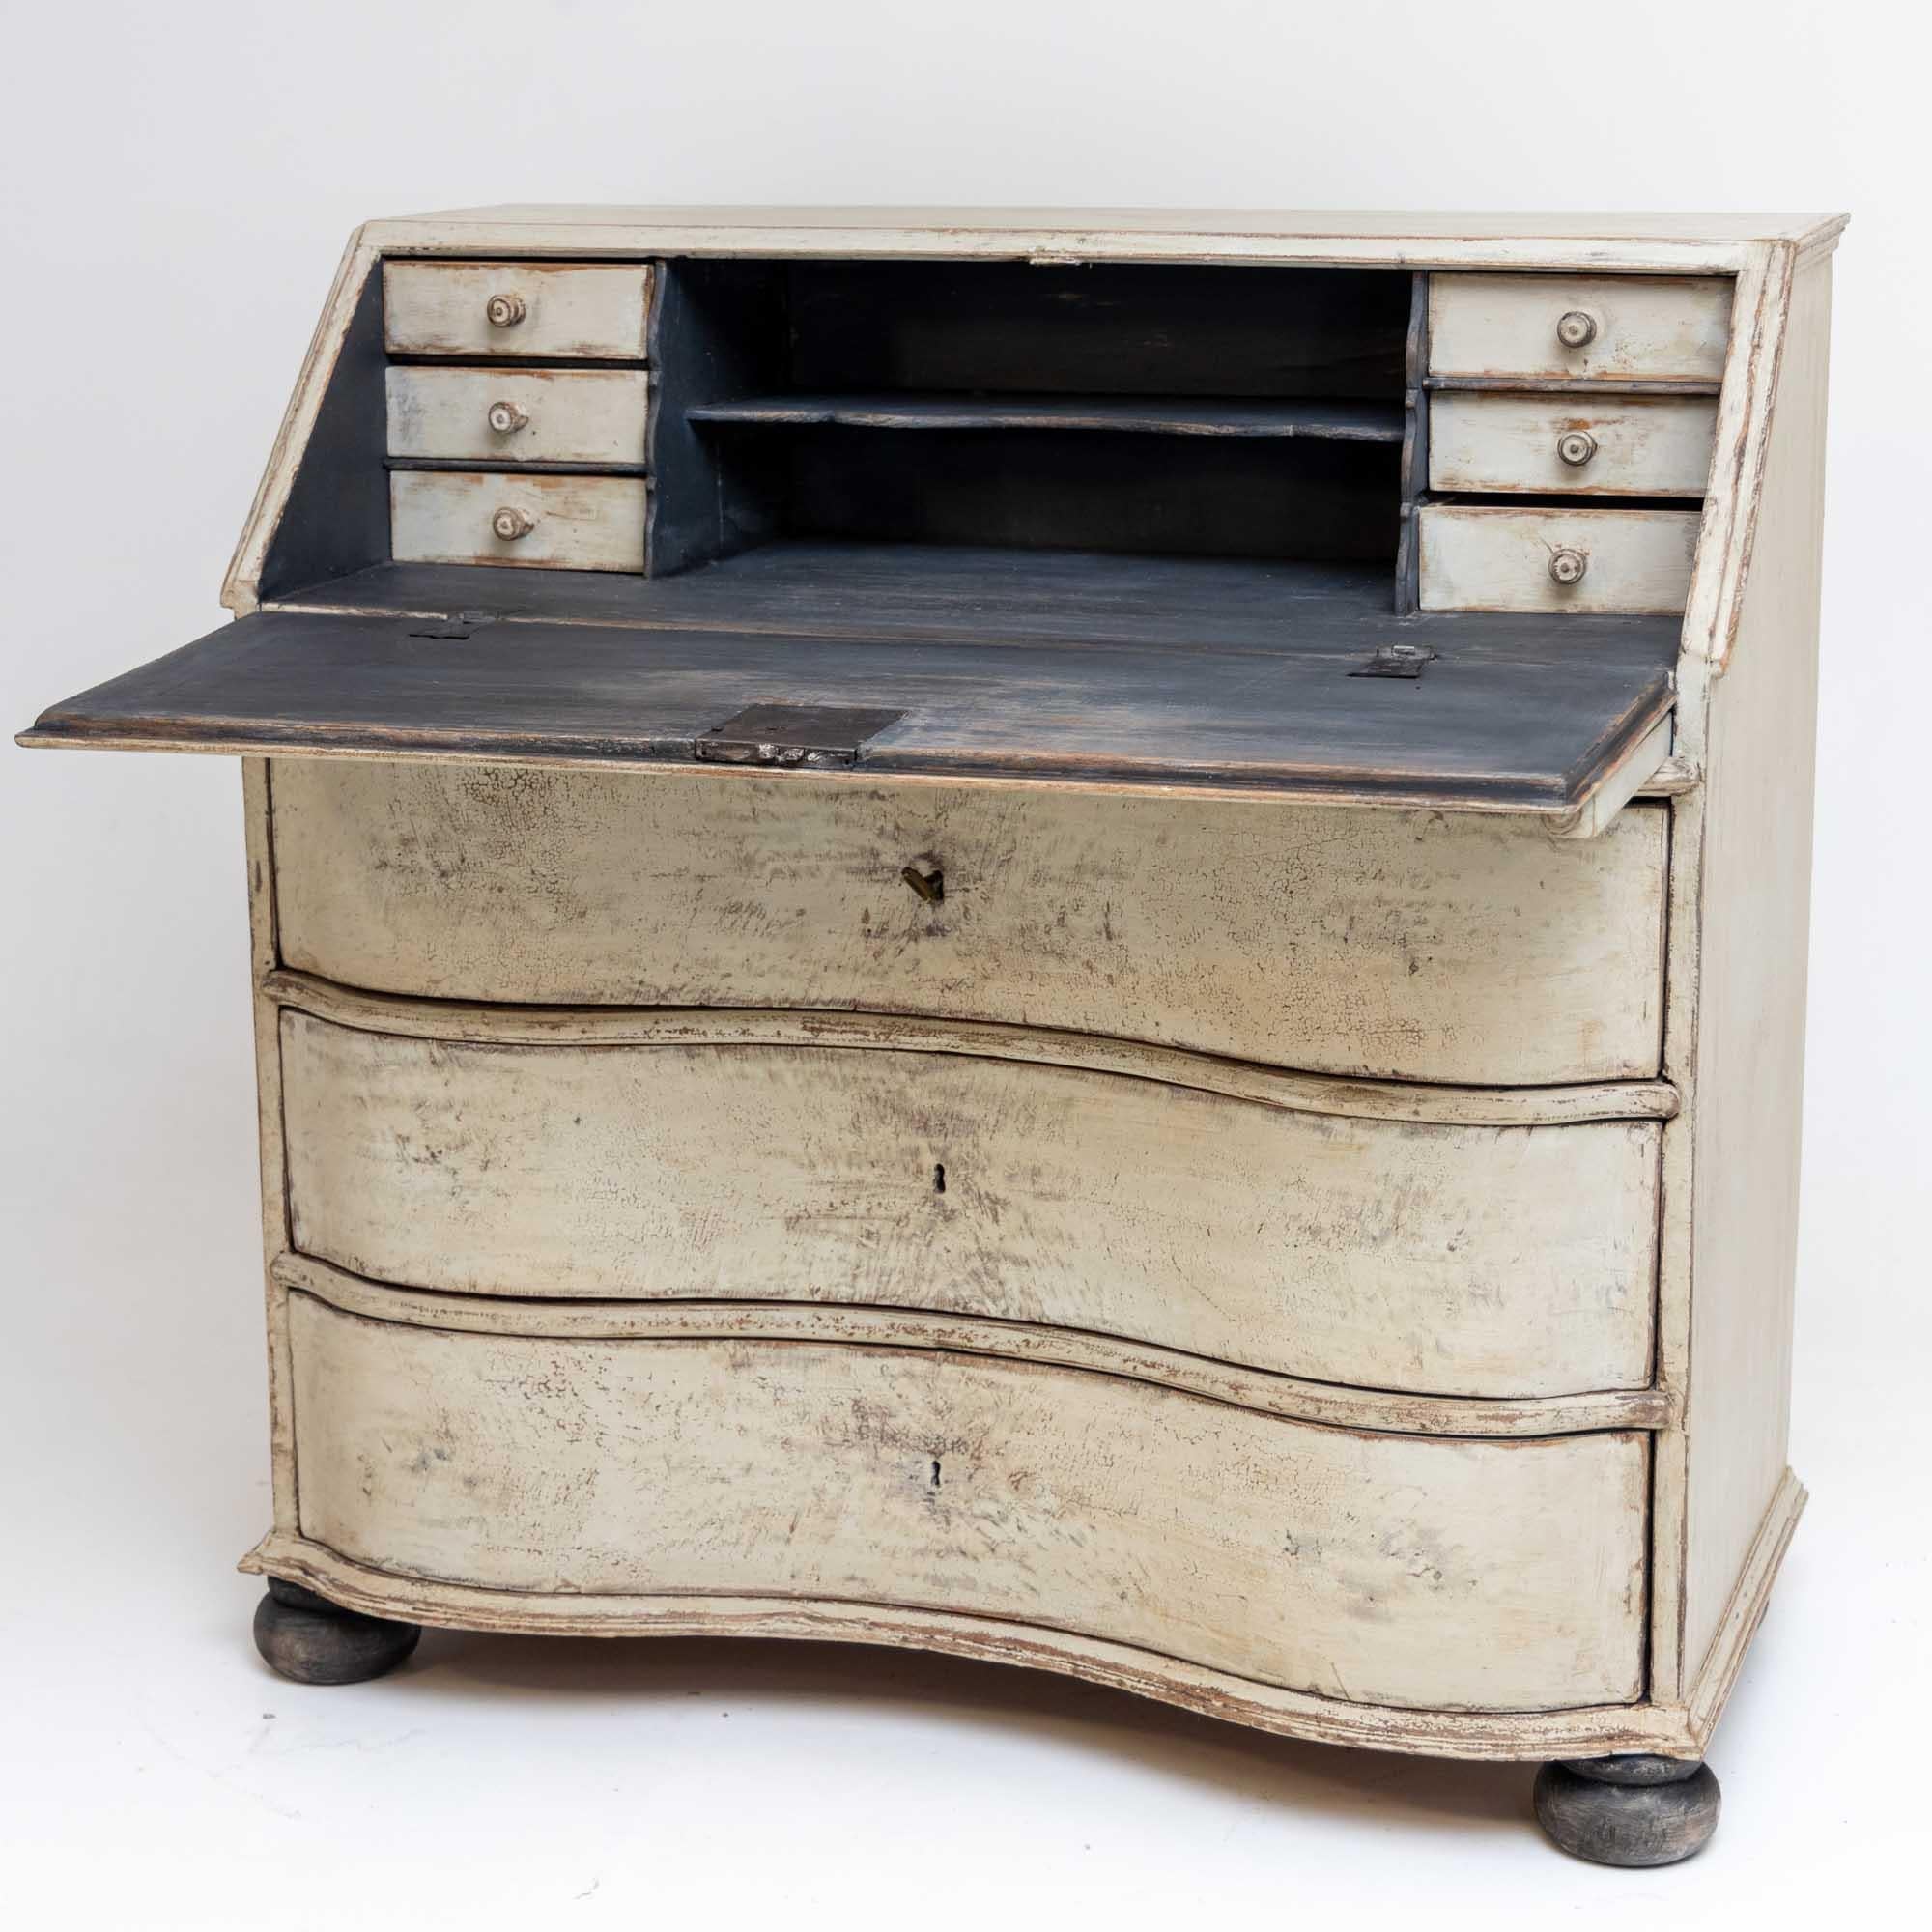 Baroque slanted-flap bureau with curved front and three drawers. The bureau rests on pressed ball feet. The compartments inside consist of six drawers and a shelf. The white painting with dark gray accents is new and has an antique patina.